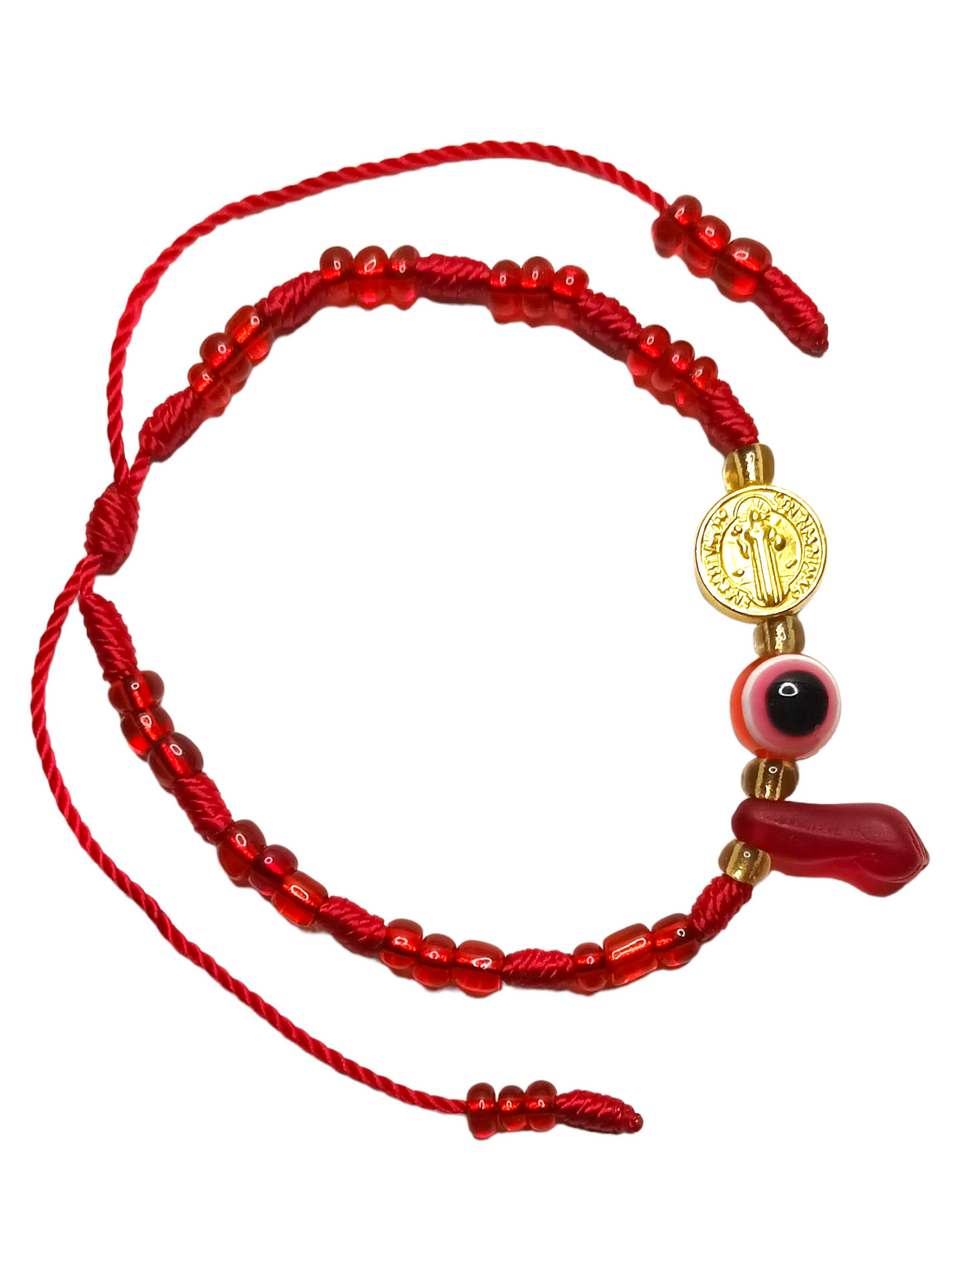 7 Knot Red Bracelet Meaning Spiritual  Personal